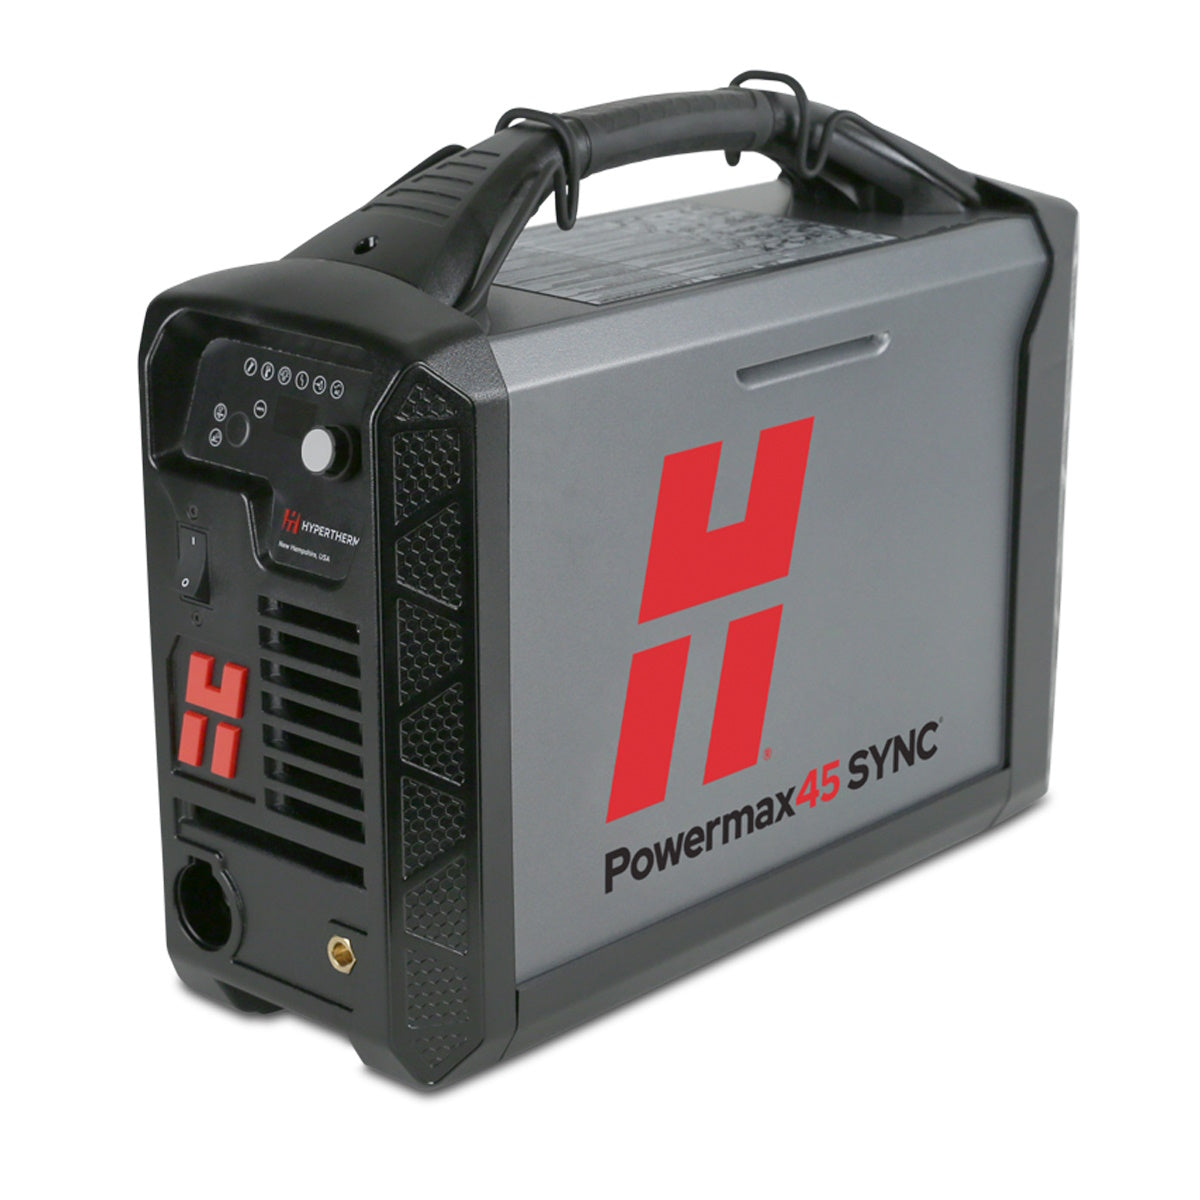 Hypertherm Powermax45 SYNC Plasma w/25ft Mechanized Torch and On/Off Pendant (088582)